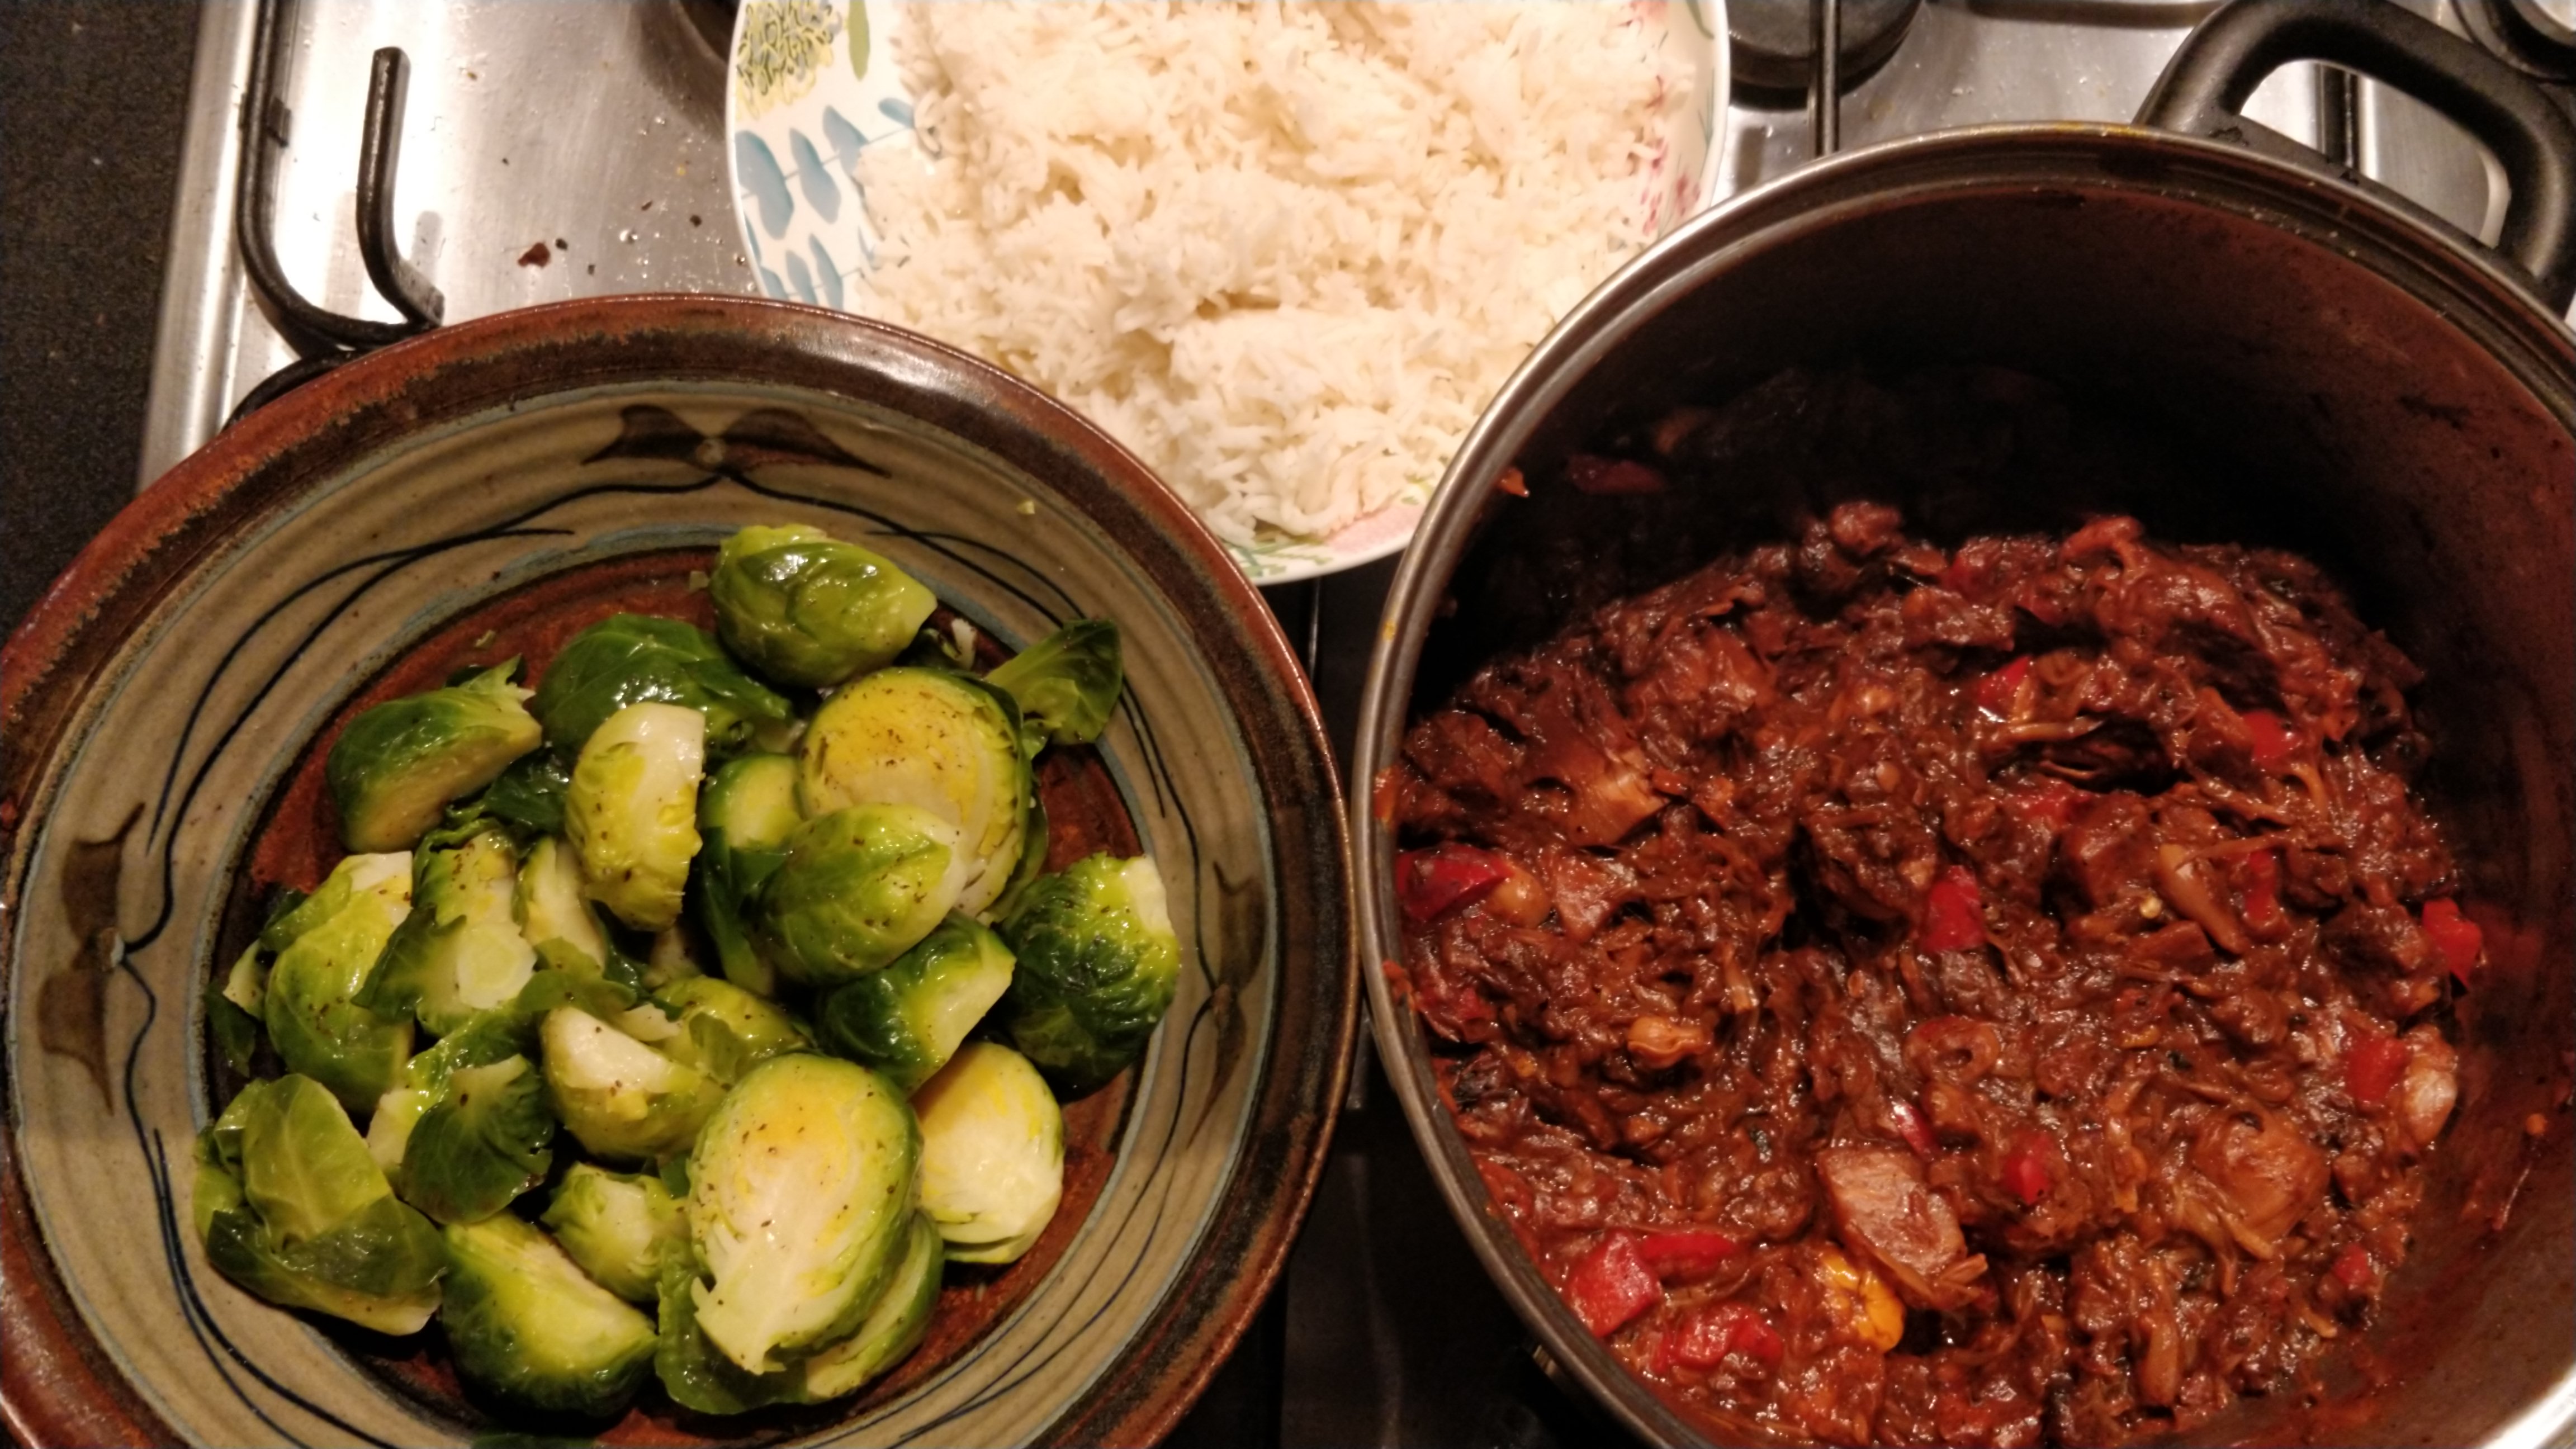 rice, jackfruit in a pot and Brussels sprouts in a bowl on a stainless steel stove